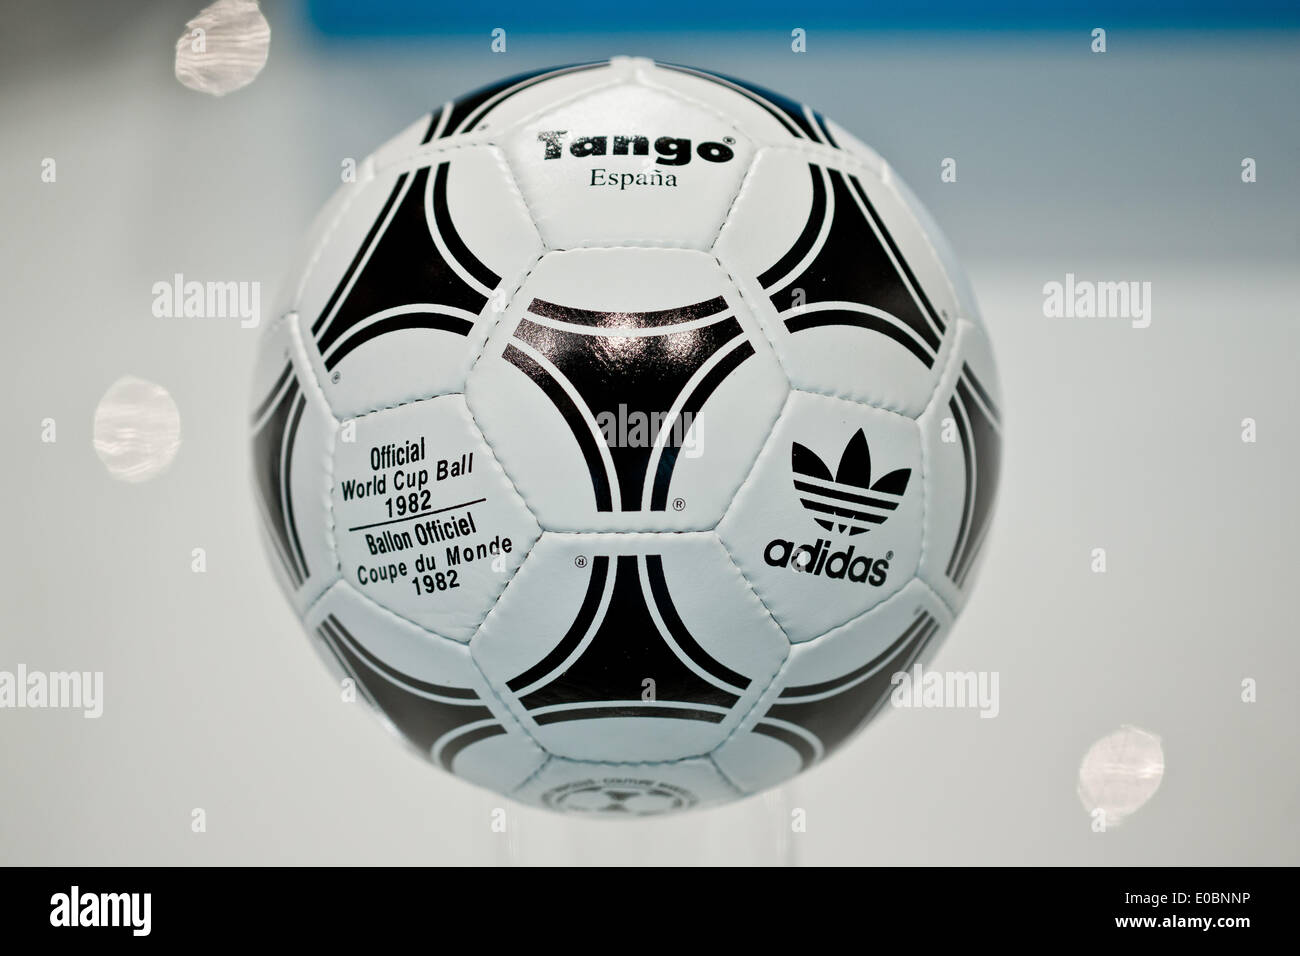 Fuerth, Germany. 08th May, 2014. The 'Tango Espana' soccer ball which was  the official ball of the 1982 soccer world cup in Spain is pictured during  the general meeting of sporting goods